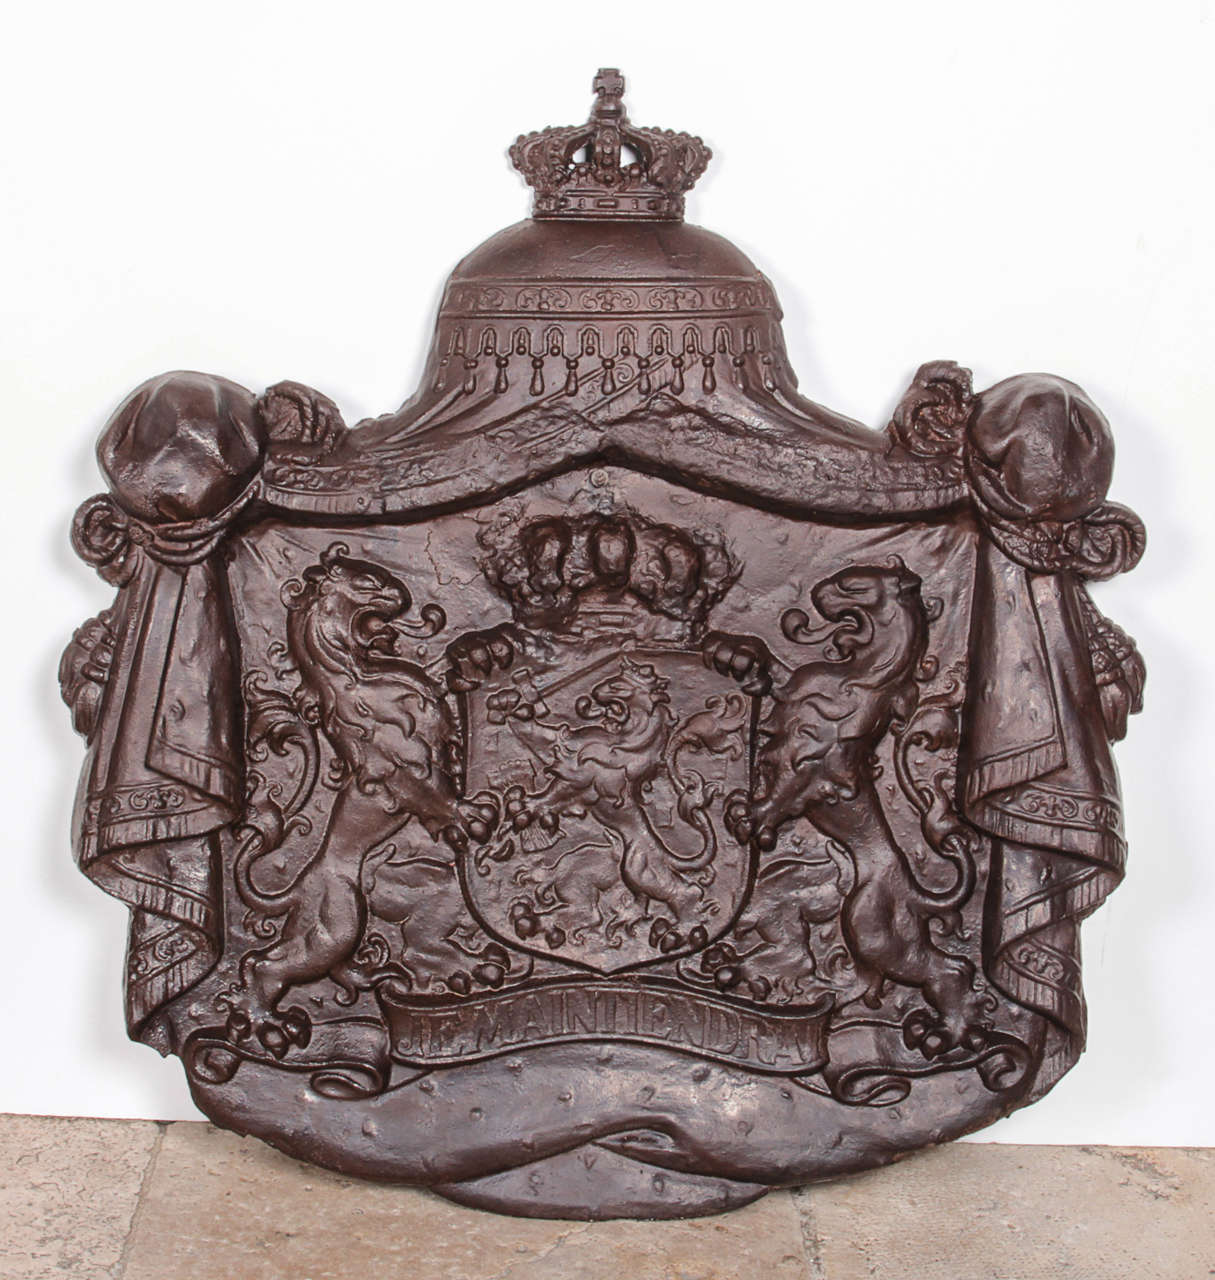 Unique cast iron plaque representing the coat of arms of the Netherlands. The shield is topped with the Dutch royal crown and supported by two lions standing on a scroll. The banner reads "Je Maintiendrai," French for "I will